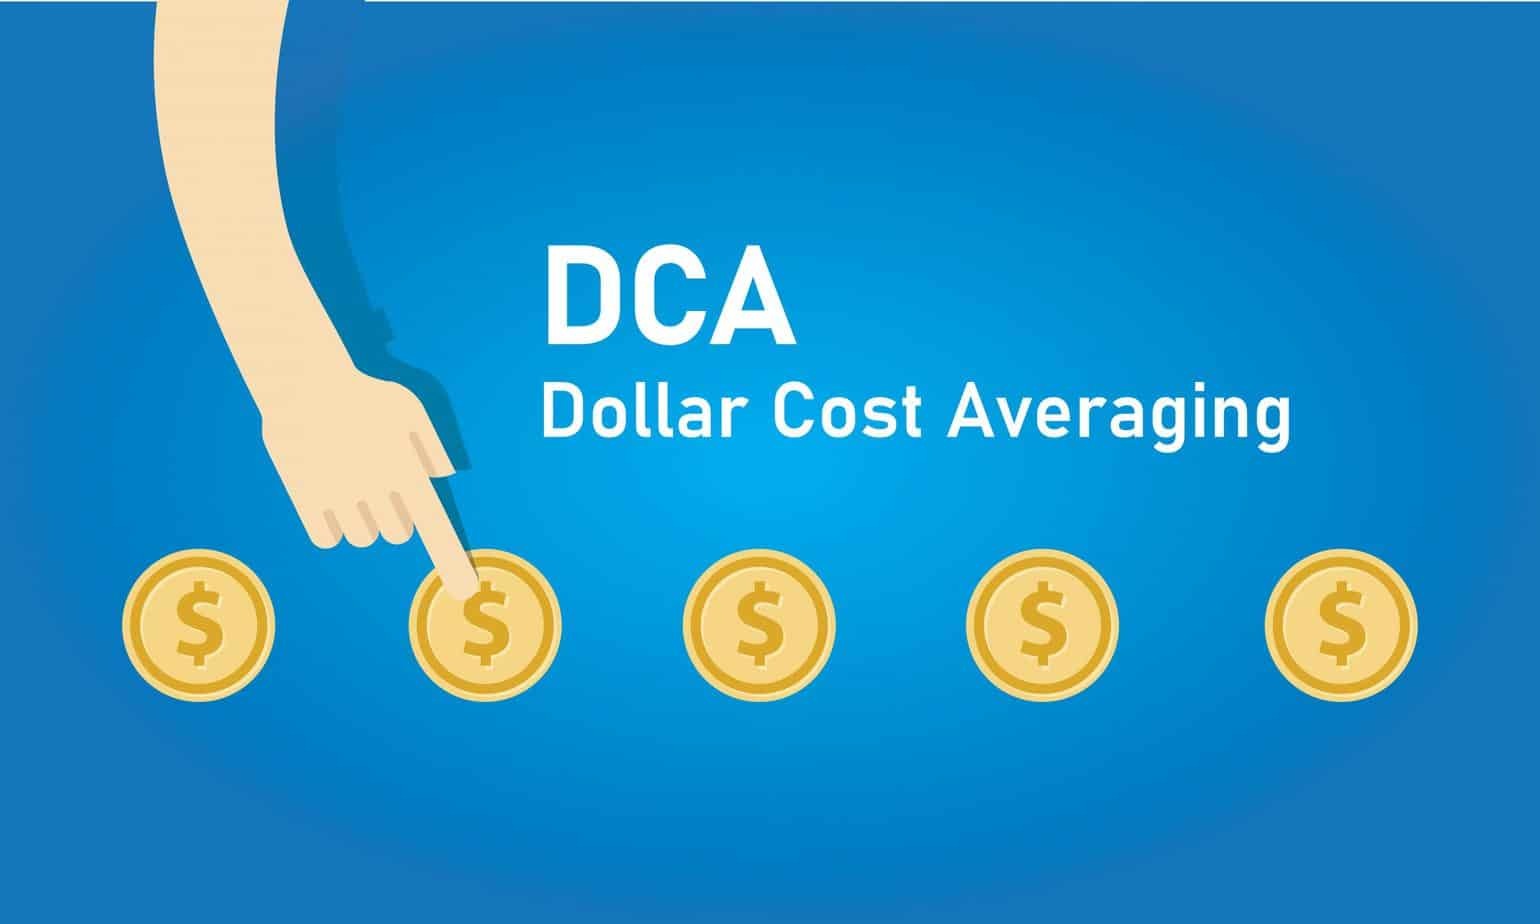 What Is Dollar Cost Averaging In Crypto?